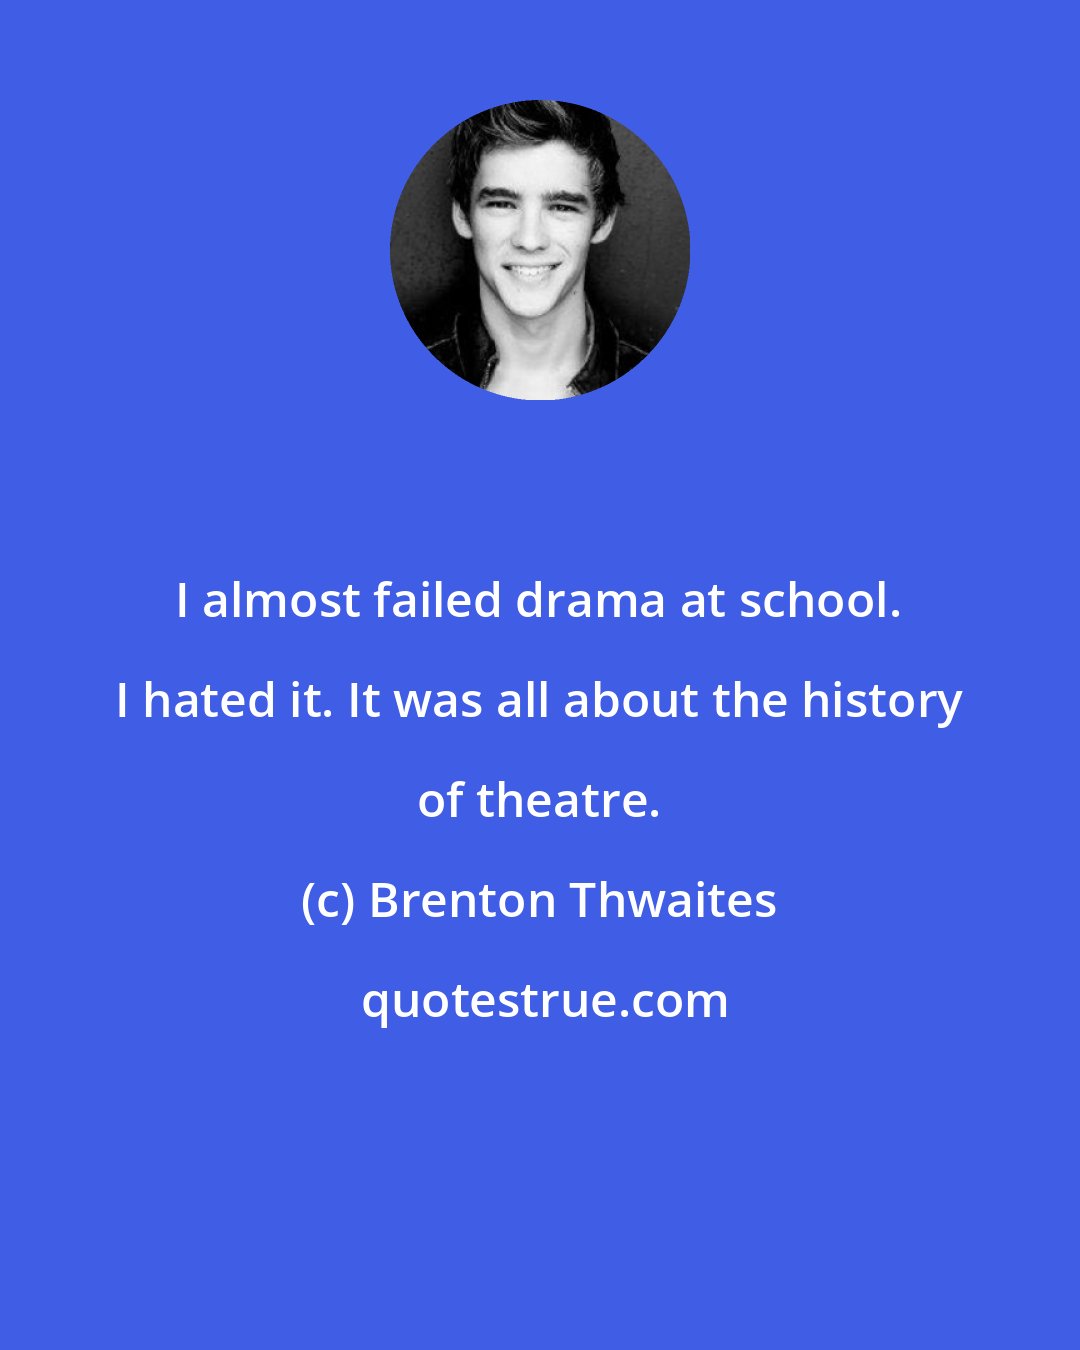 Brenton Thwaites: I almost failed drama at school. I hated it. It was all about the history of theatre.